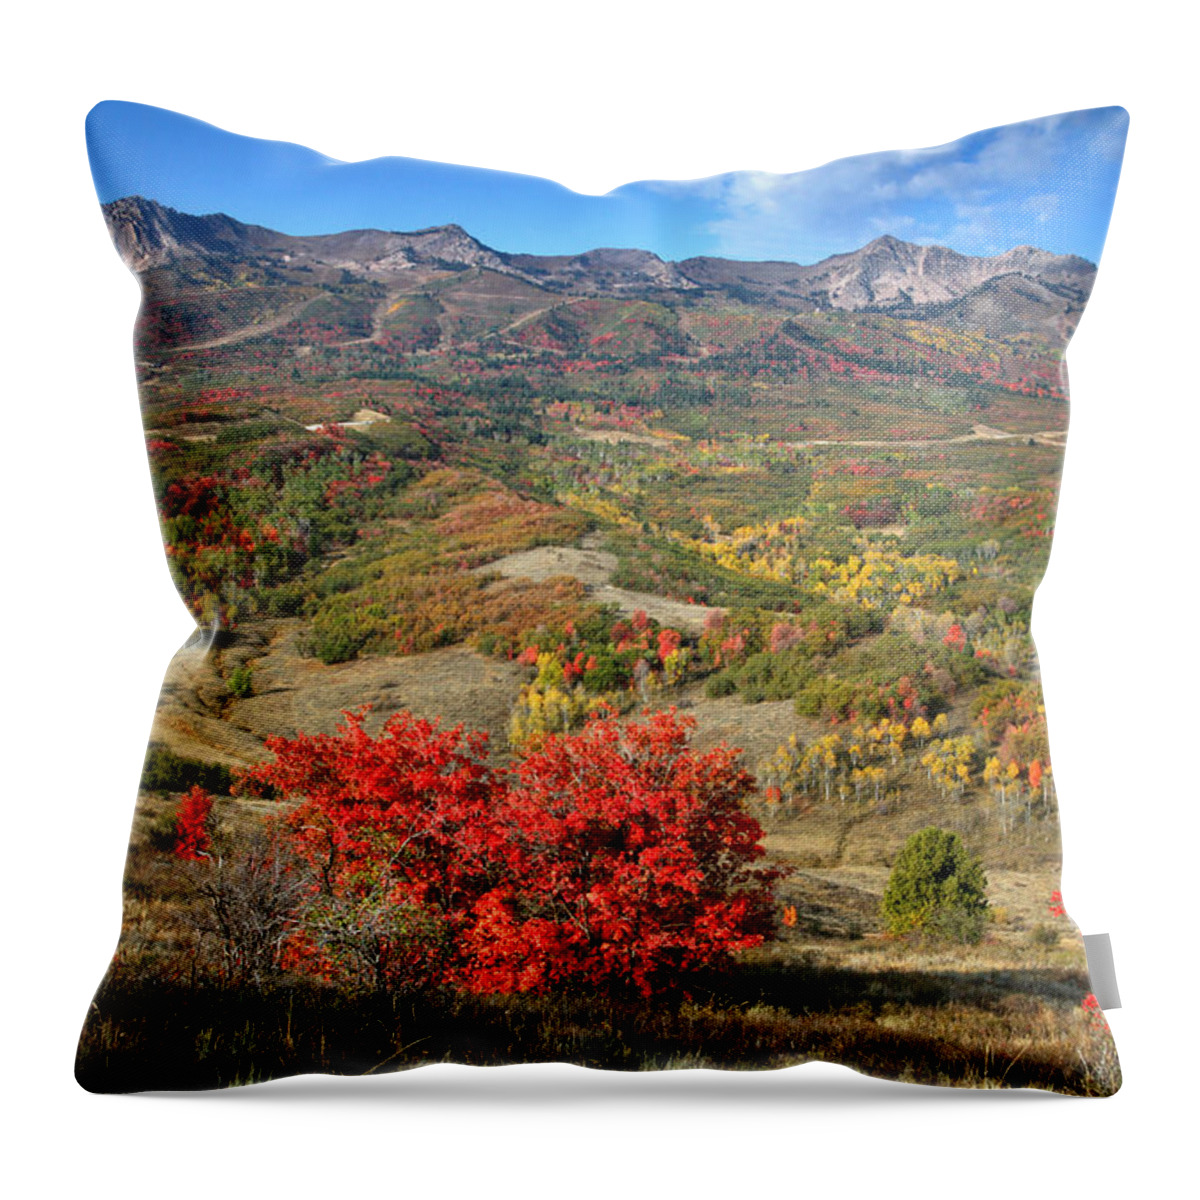 Snowbasin Throw Pillow featuring the photograph Snowbasin and Autumn Colors by Brett Pelletier